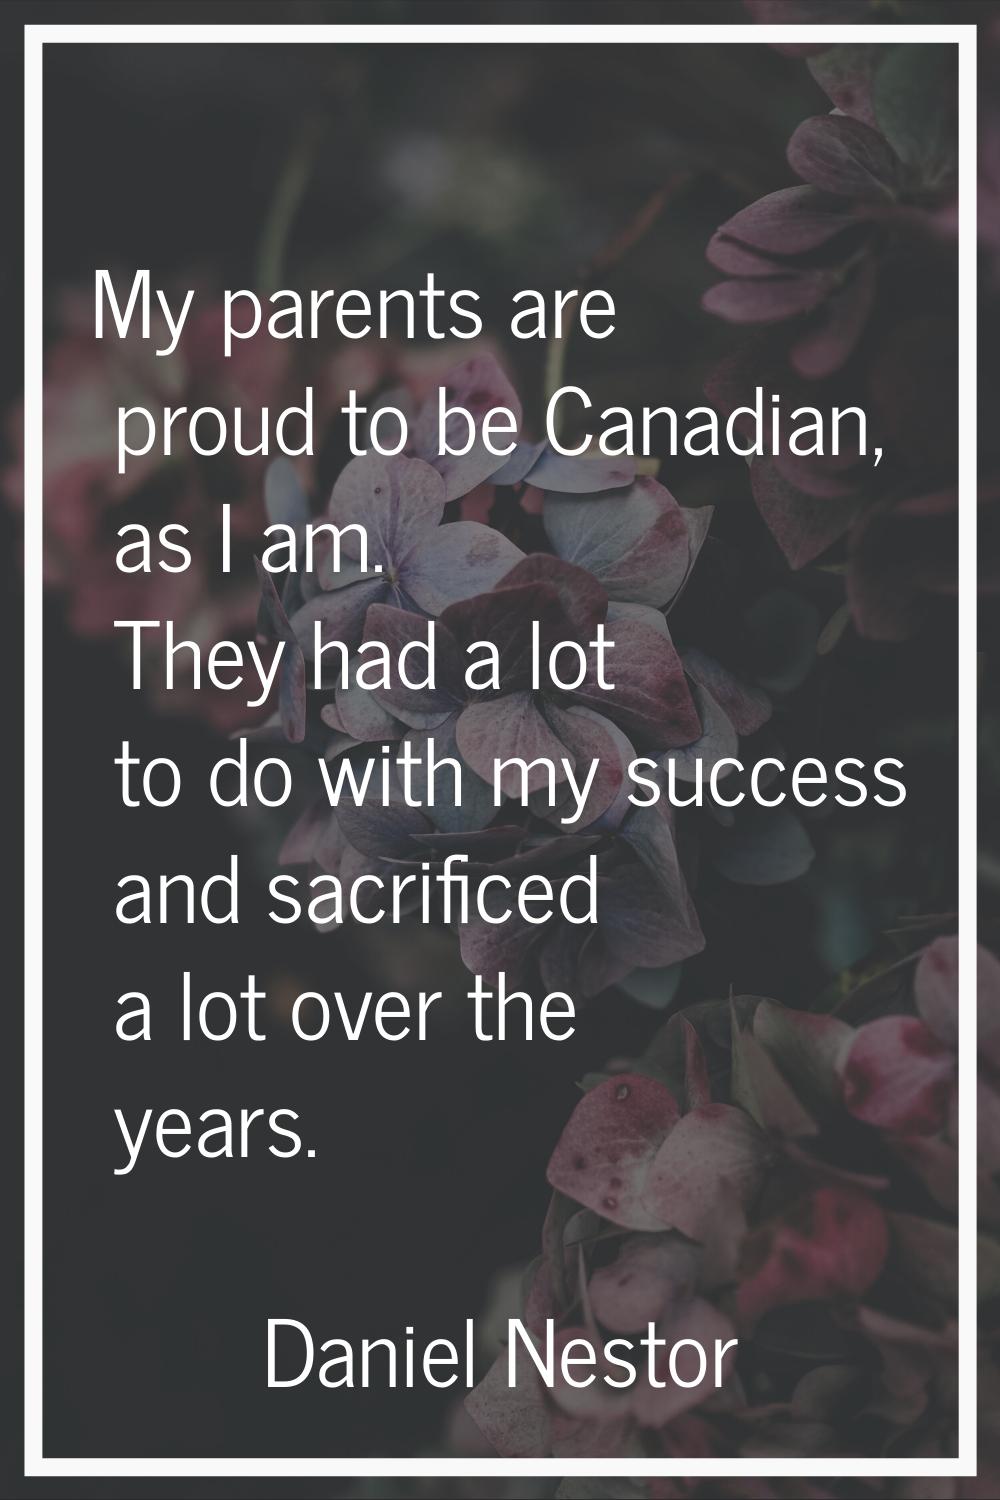 My parents are proud to be Canadian, as I am. They had a lot to do with my success and sacrificed a